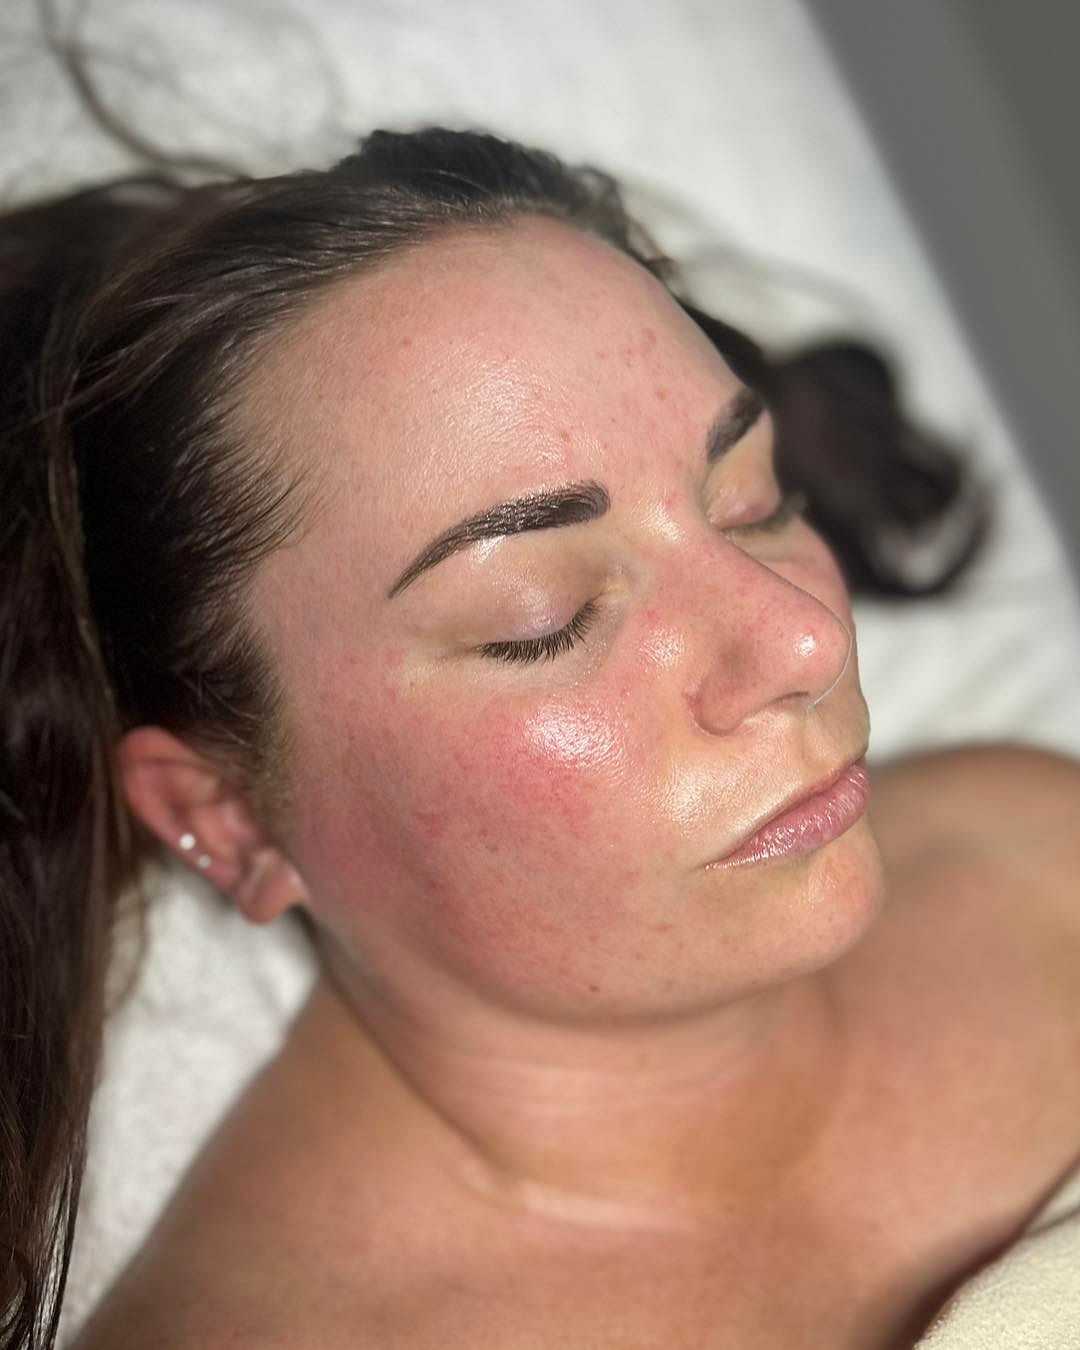 Woman with facial redness and closed eyes, lying down on a white surface, possibly during skincare.